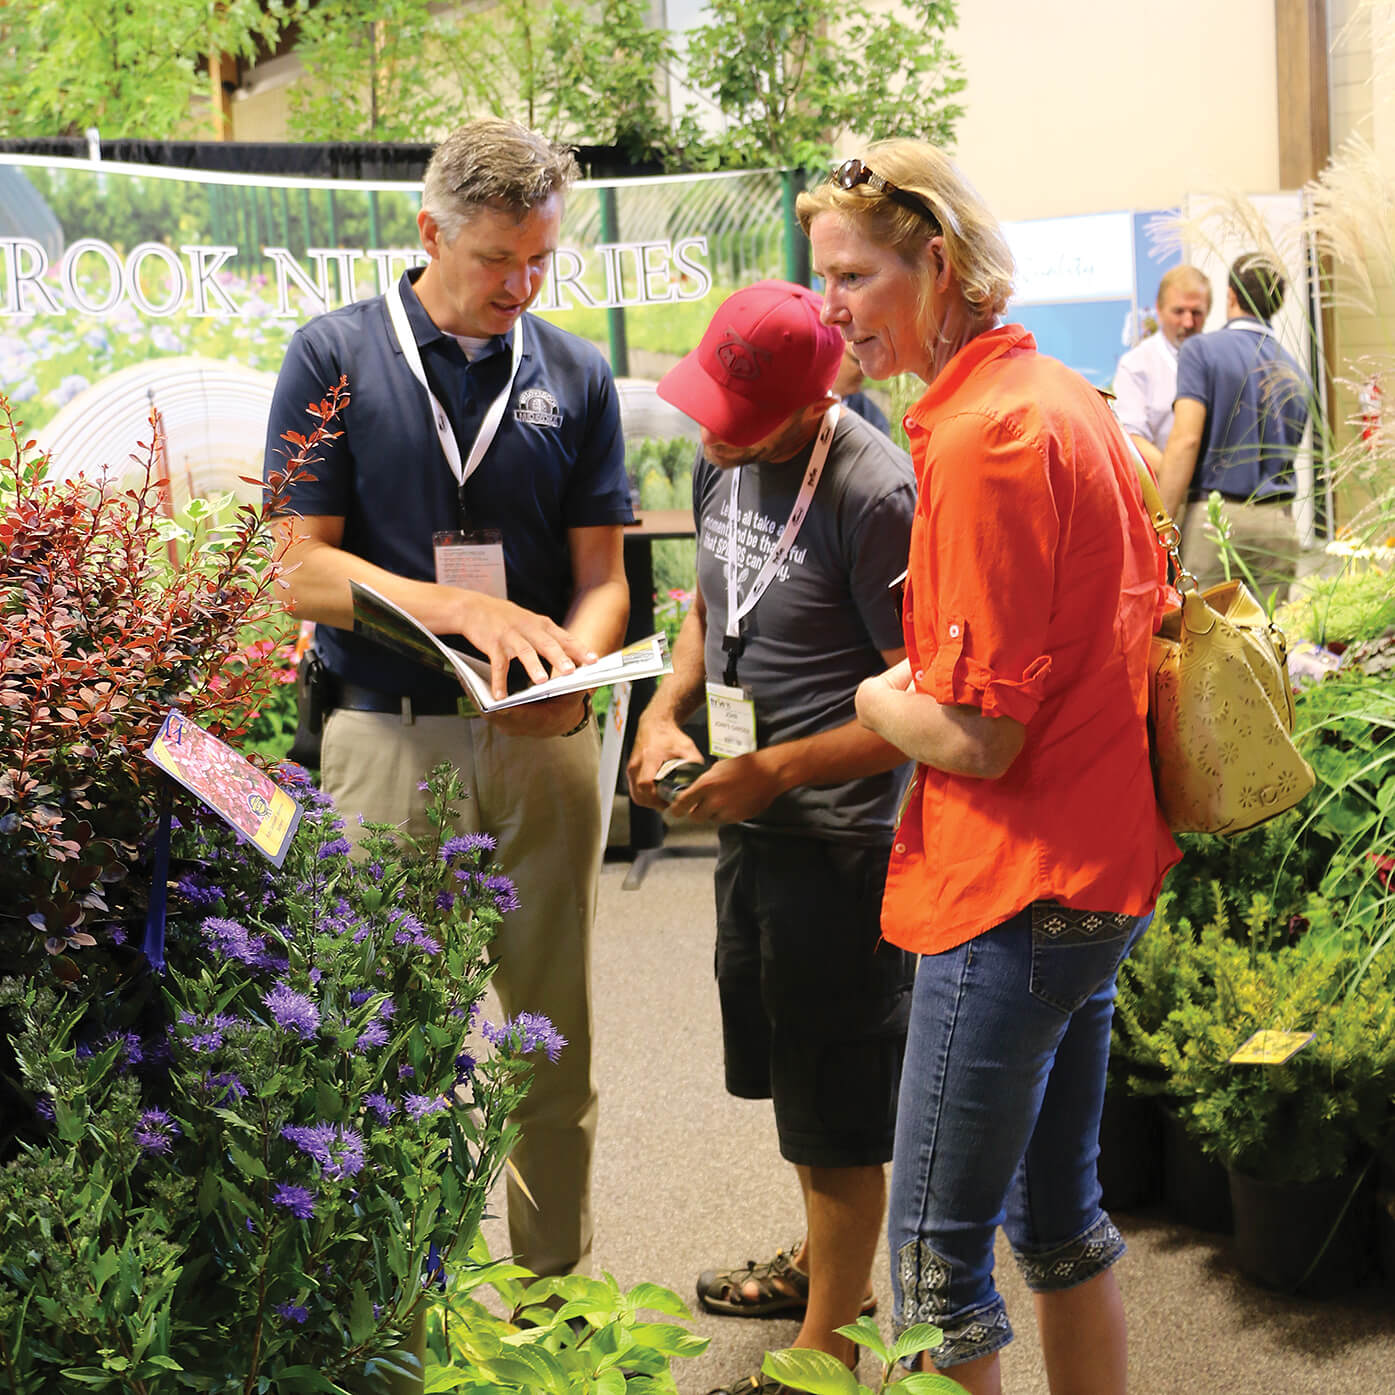 people shopping for plants at a trade show